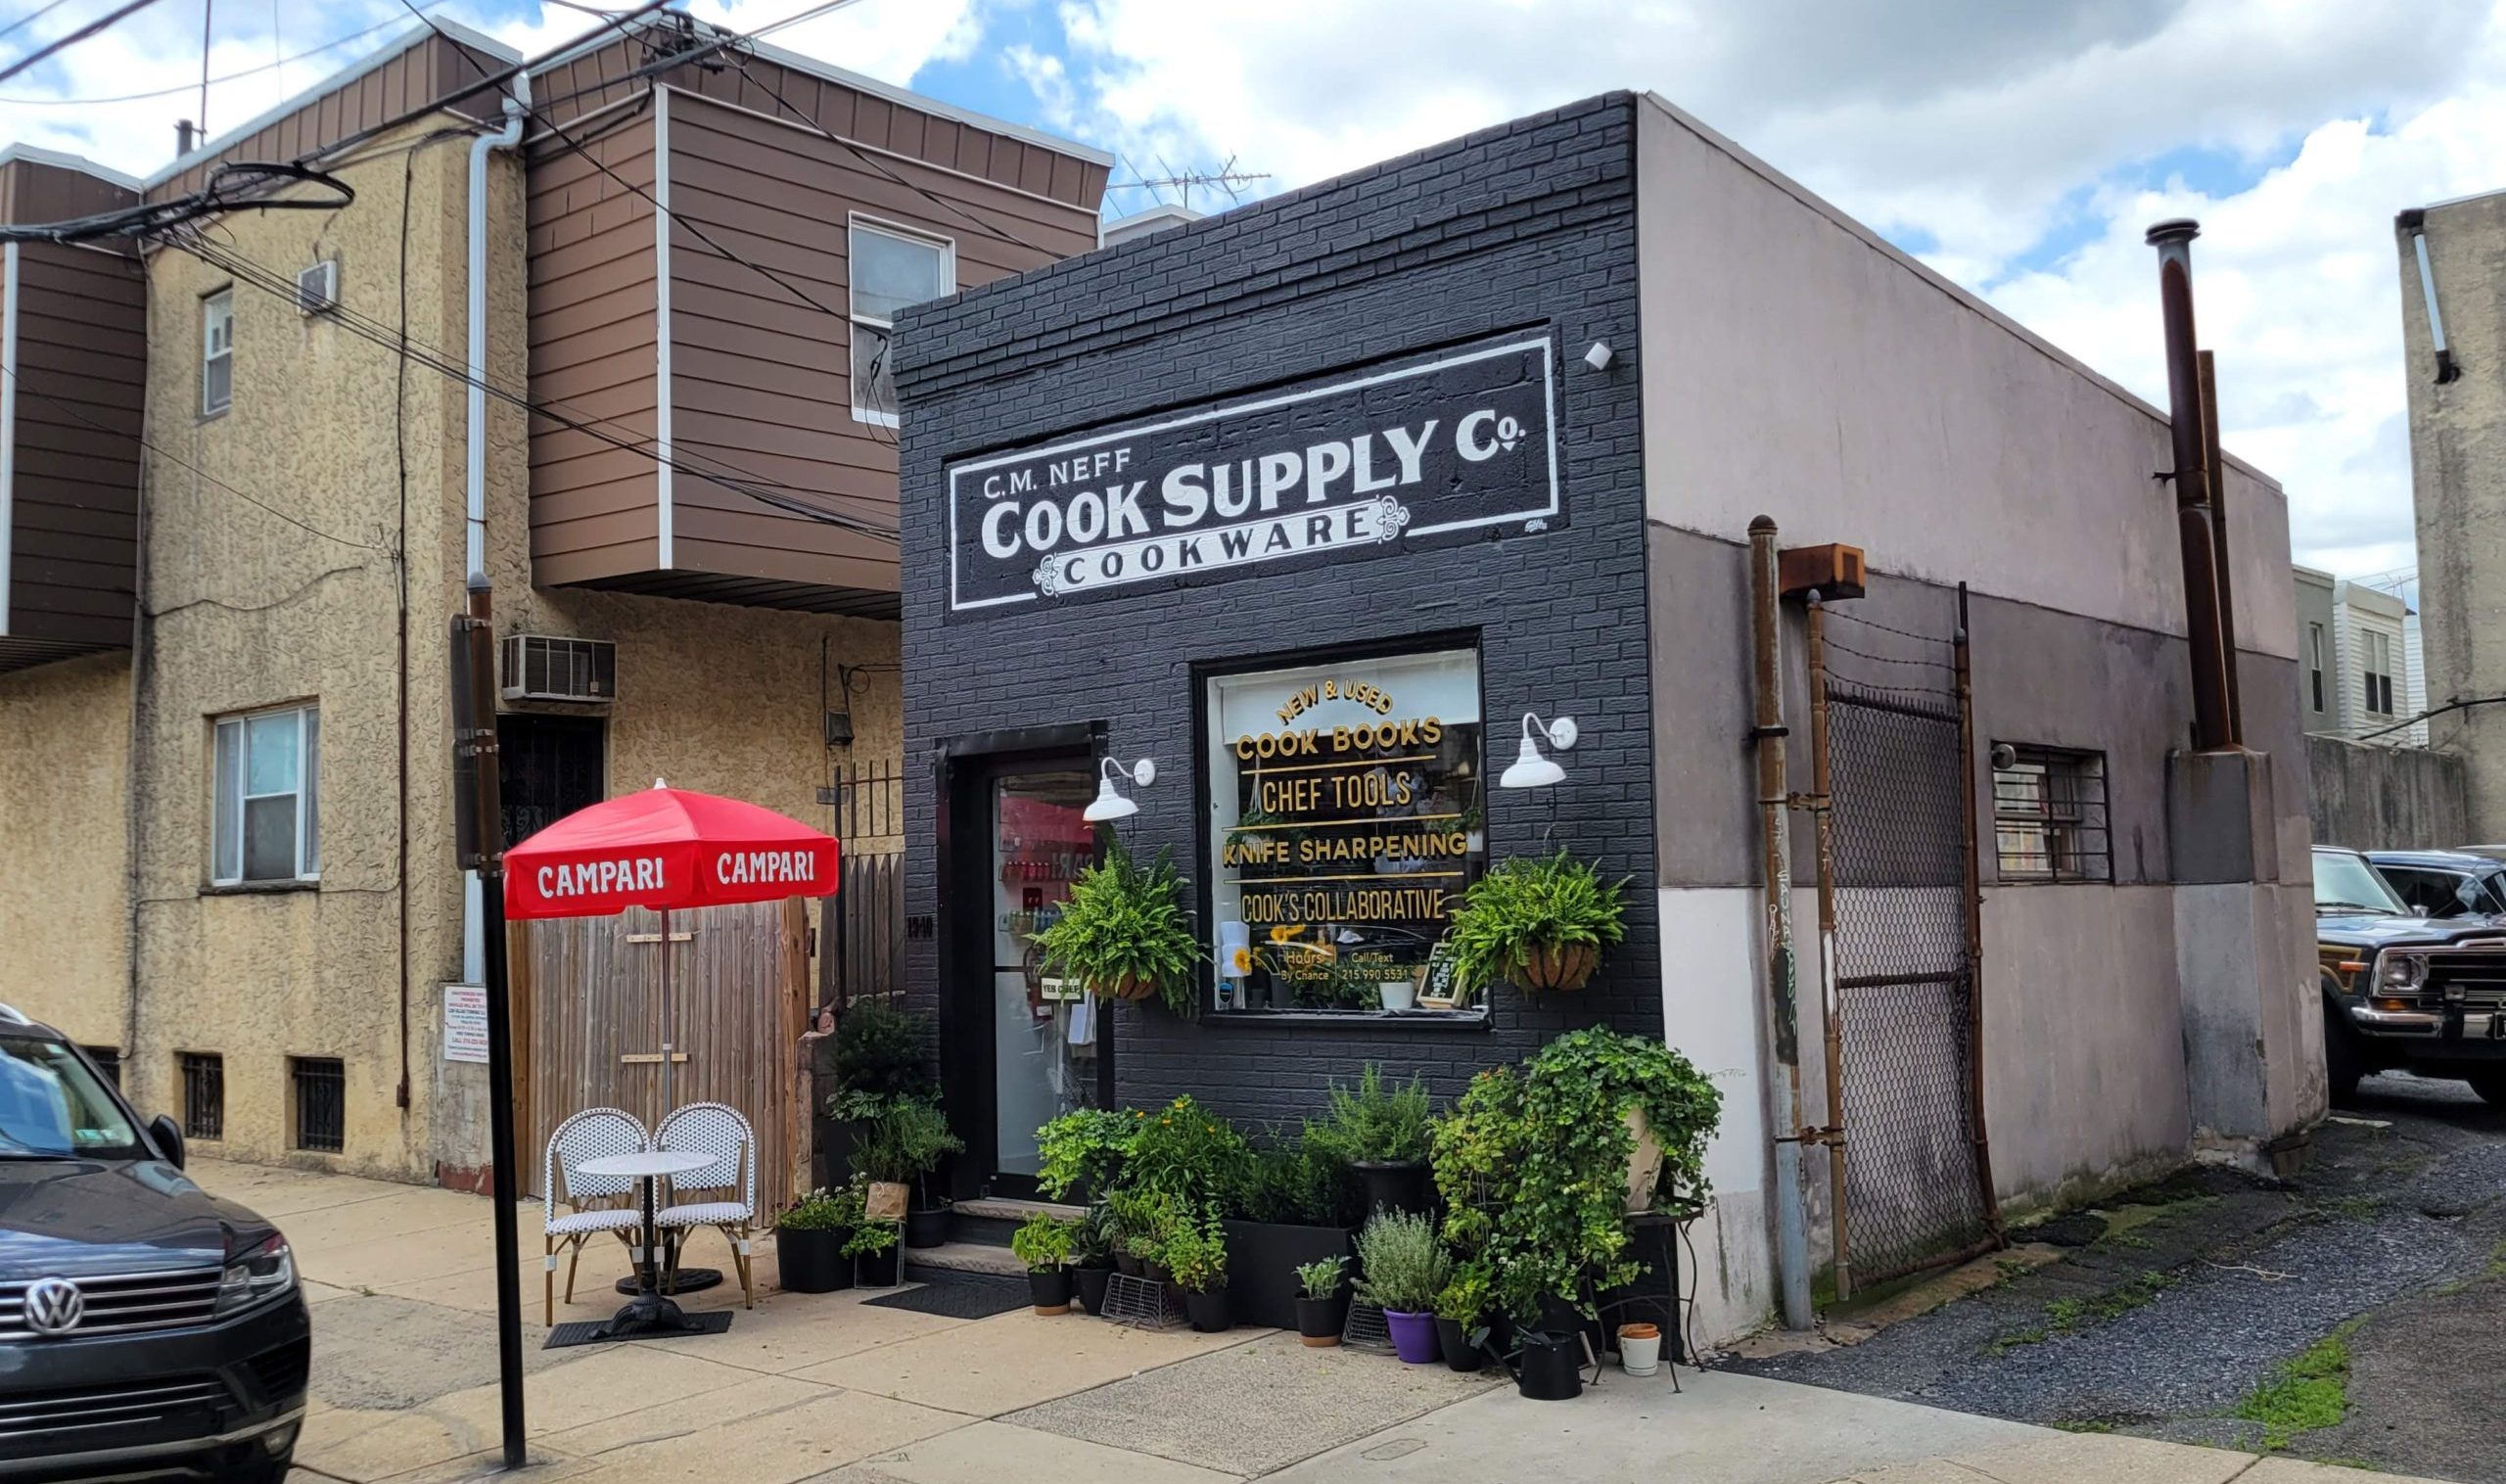 Philly chef opens C.M. Neff: Cook Sup. Co., a one-stop-shop